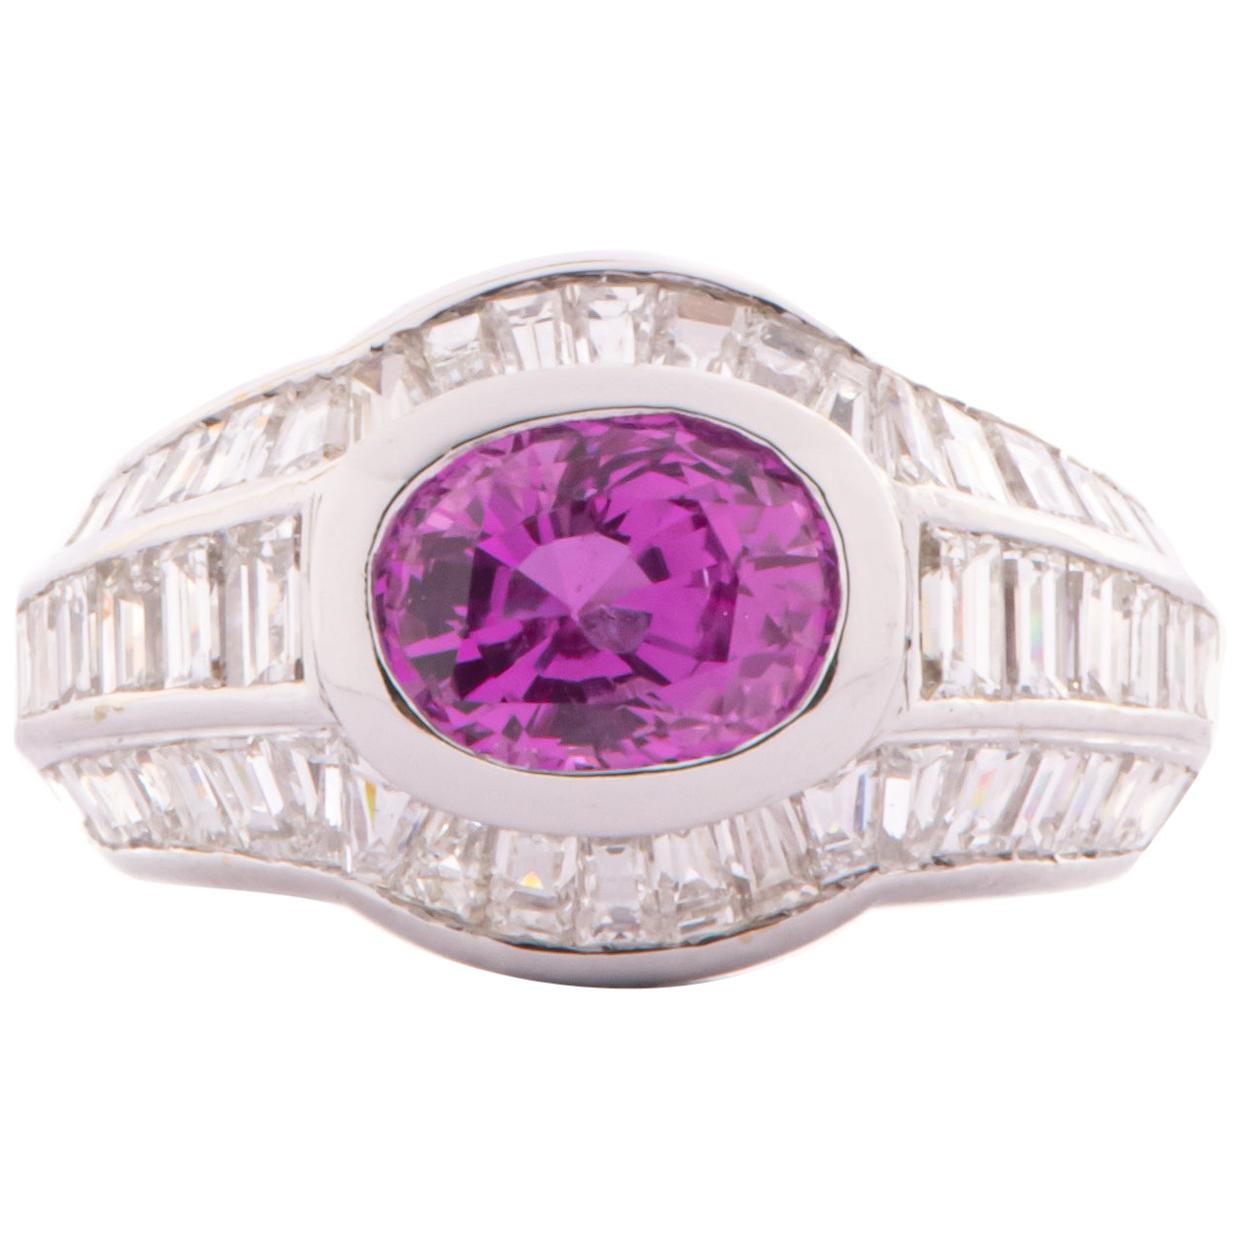 Exquisite Pink Sapphire, Baguettes Diamonds and 18kt White Gold Cocktail Ring